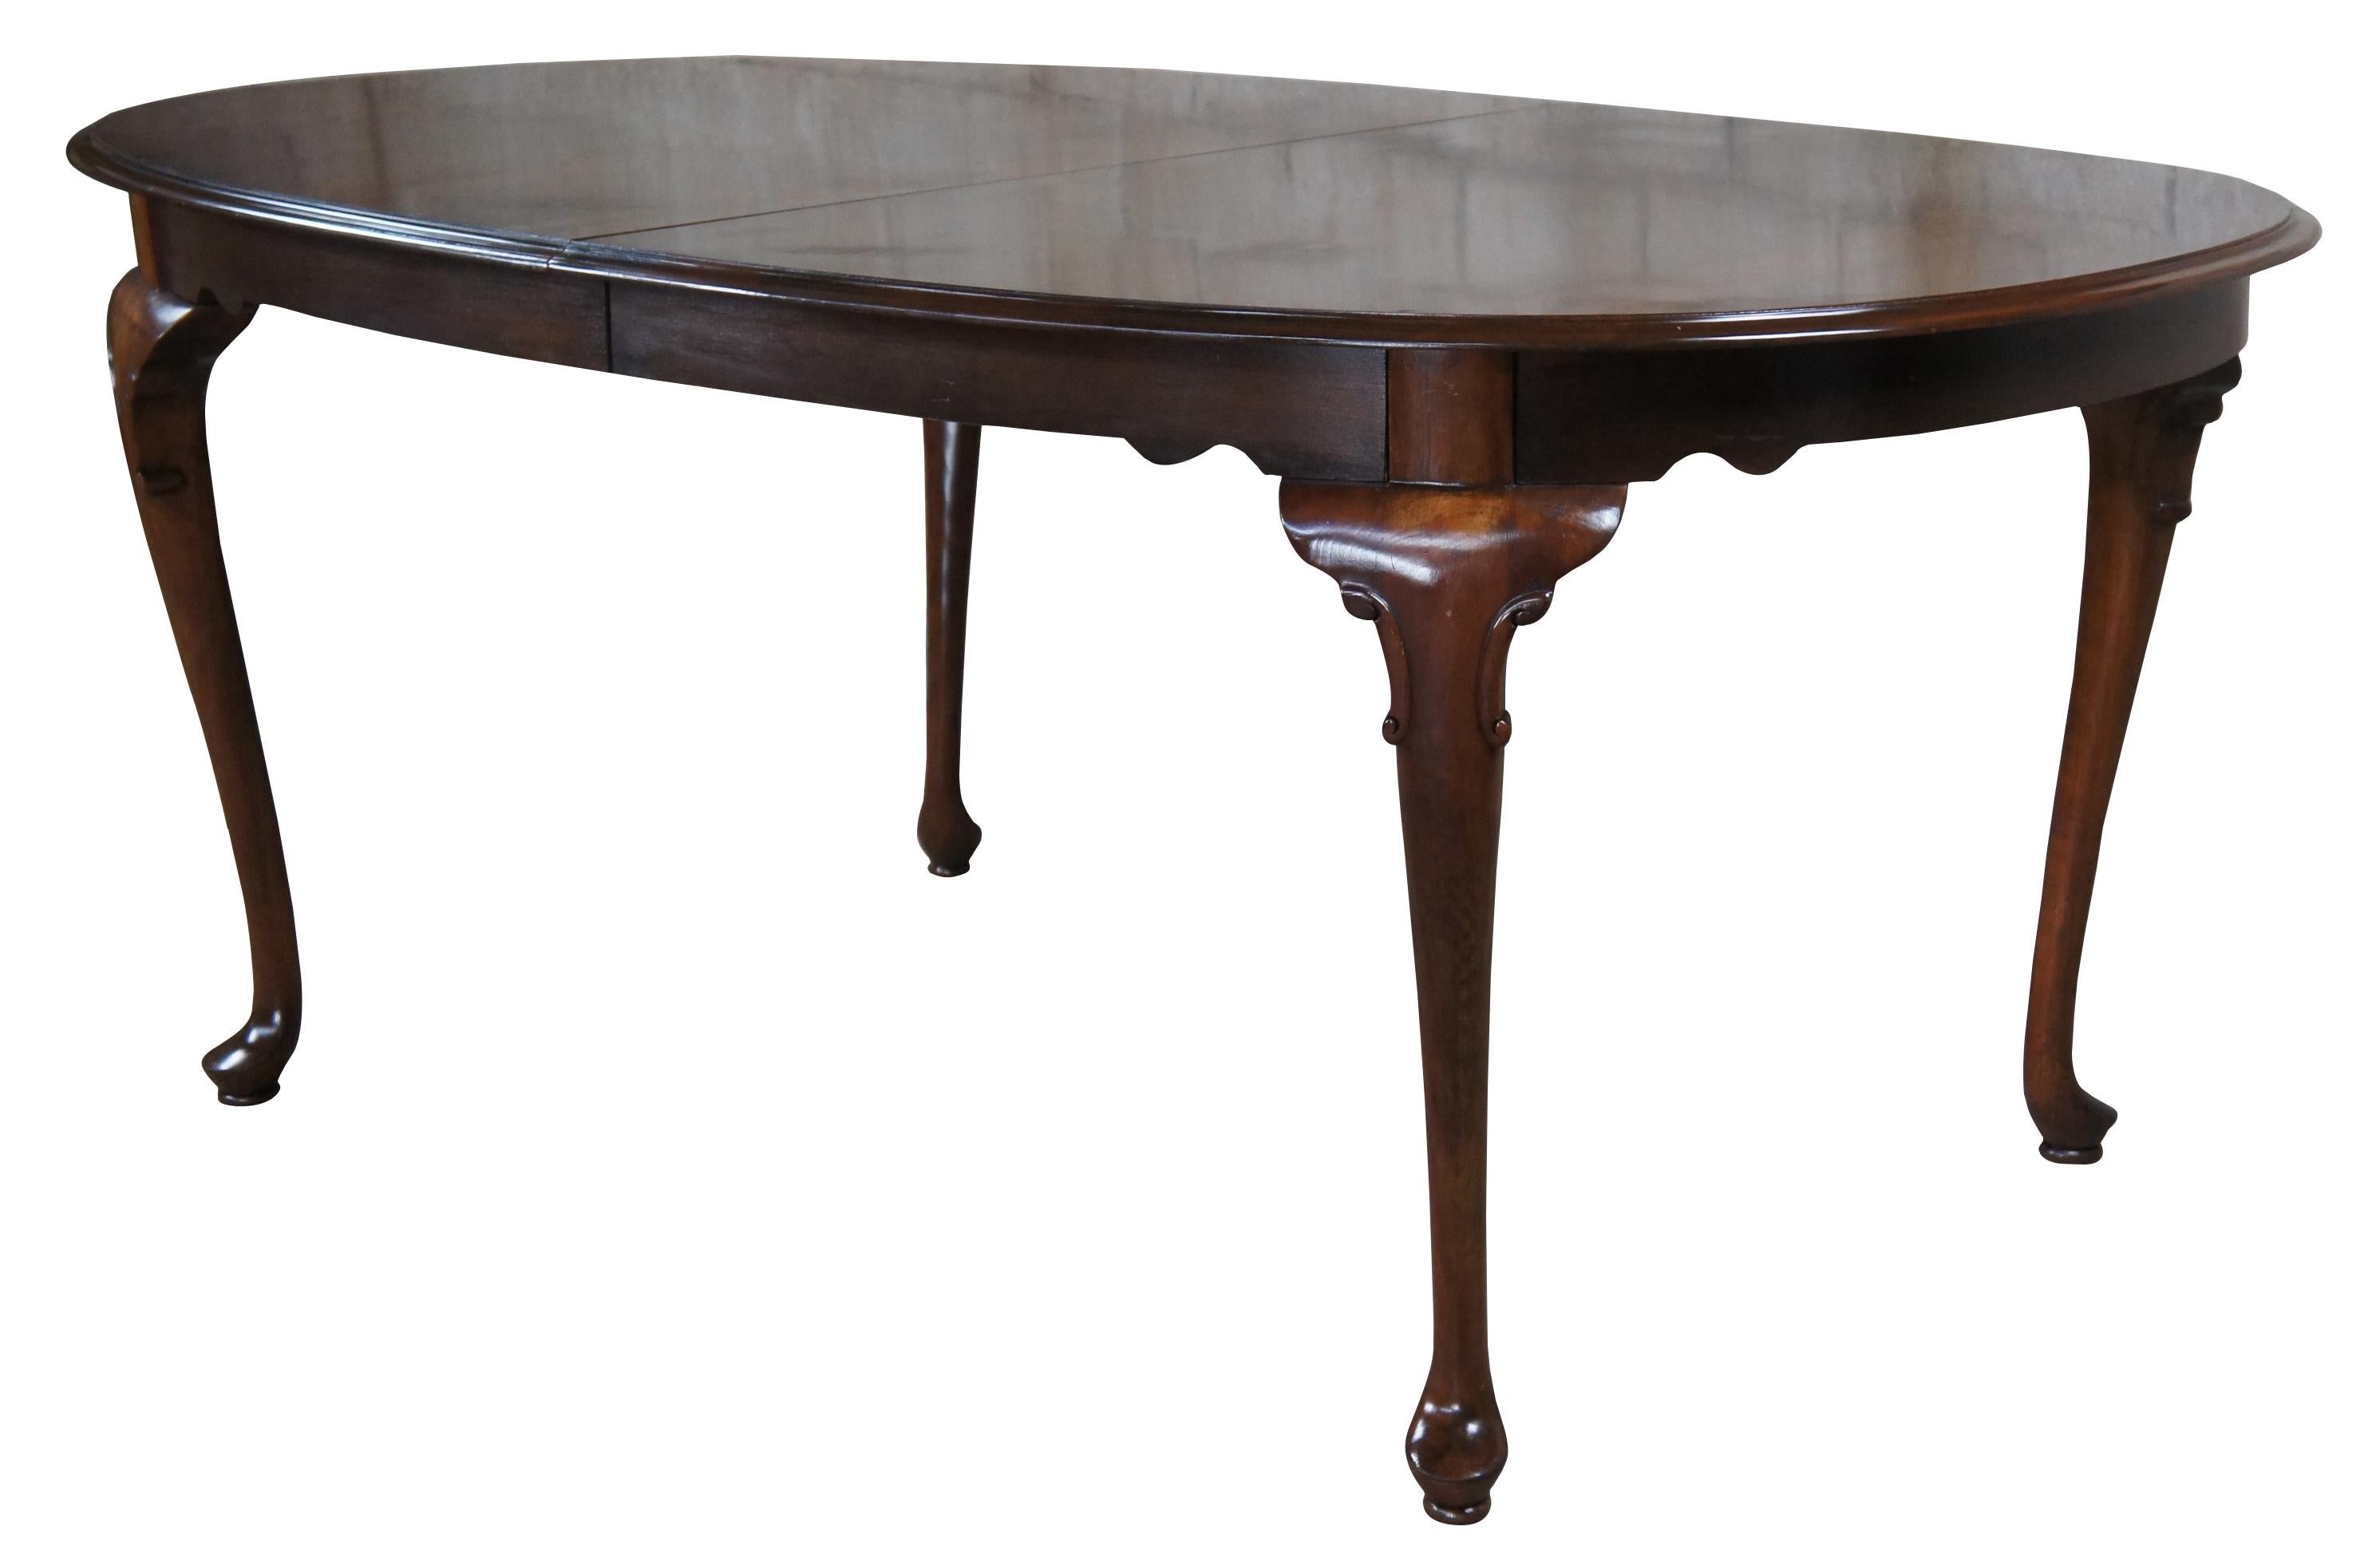 Ethan Allen Georgian court oval extension table, Circa 1980s. Made from Cherry with 2 leaves for extension, queen anne legs and pad feet. 11-6214

Measures: 44